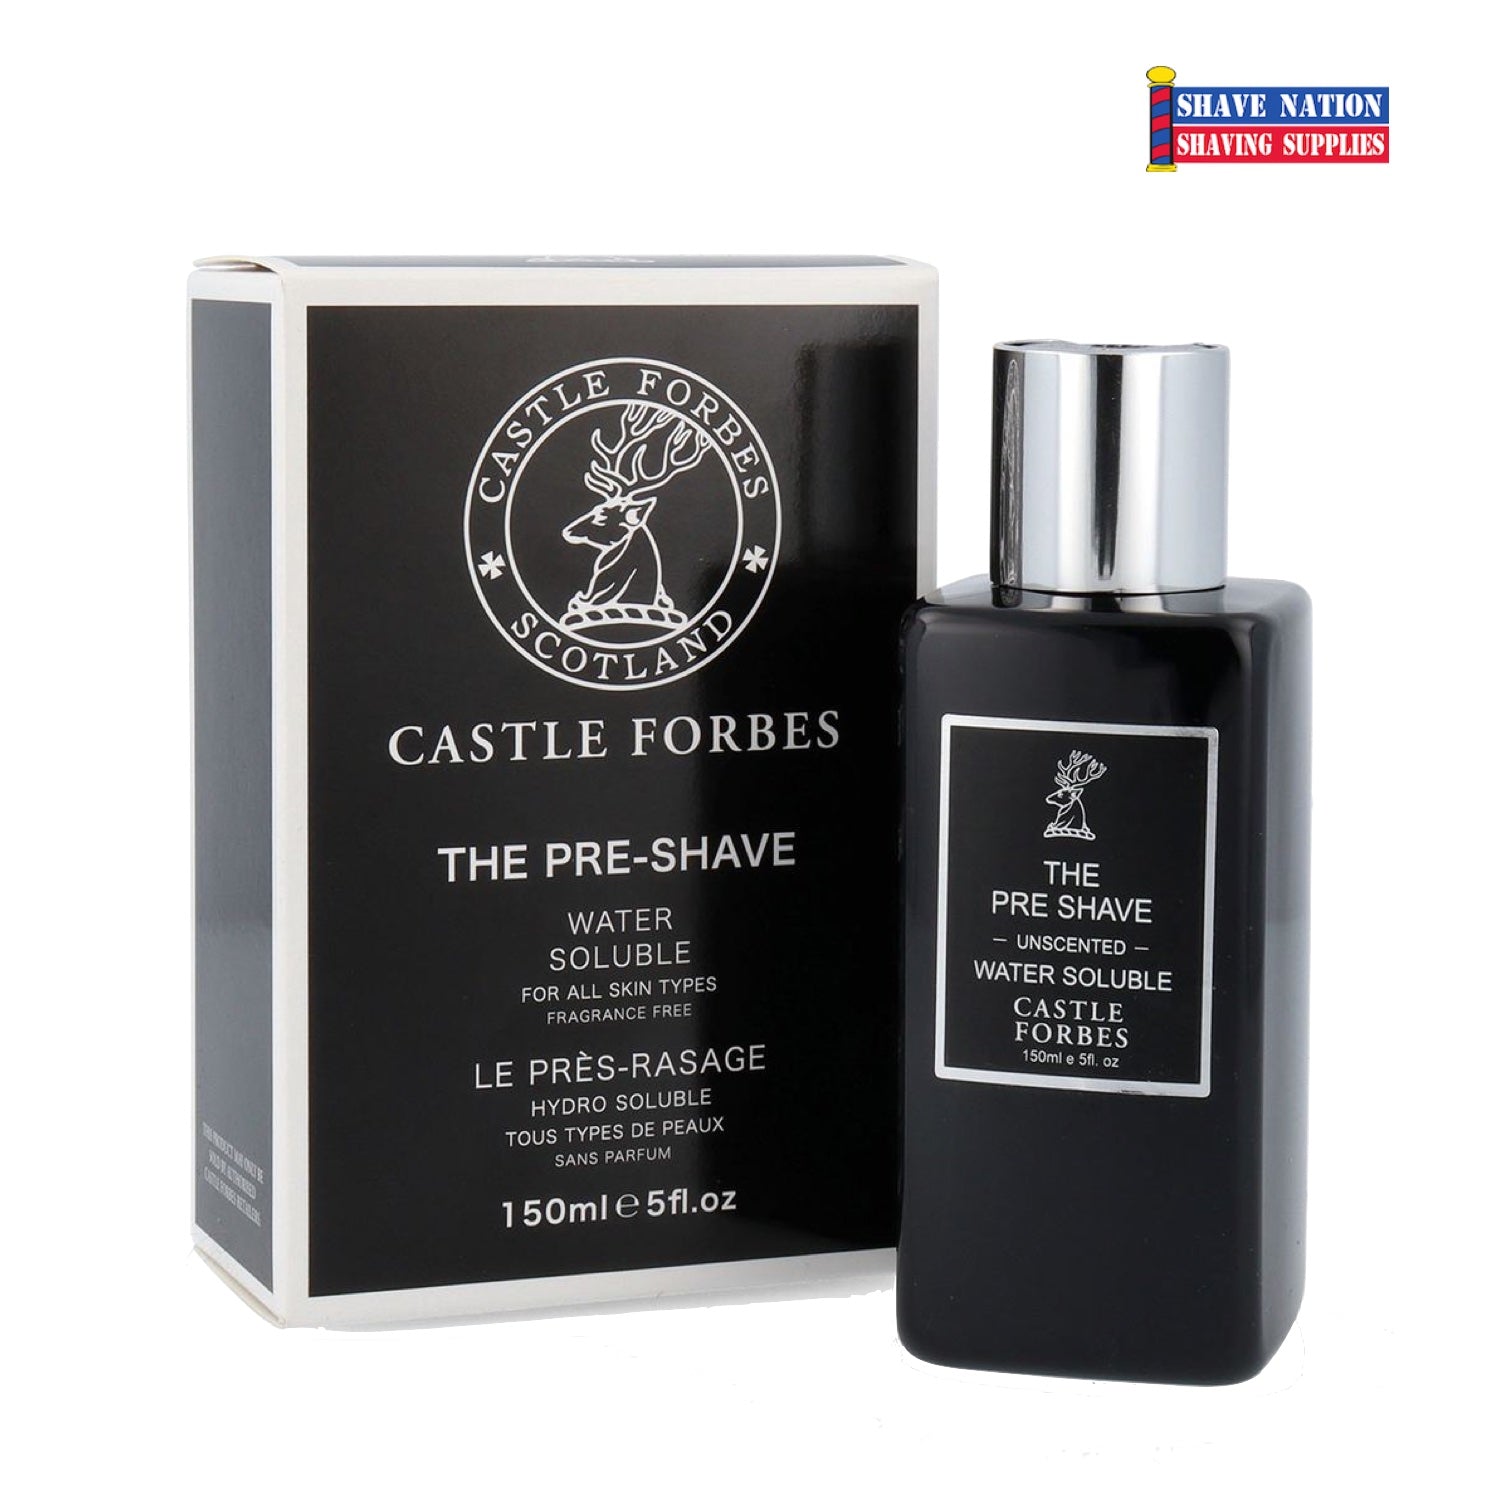 Castle Forbes The Pre-Shave